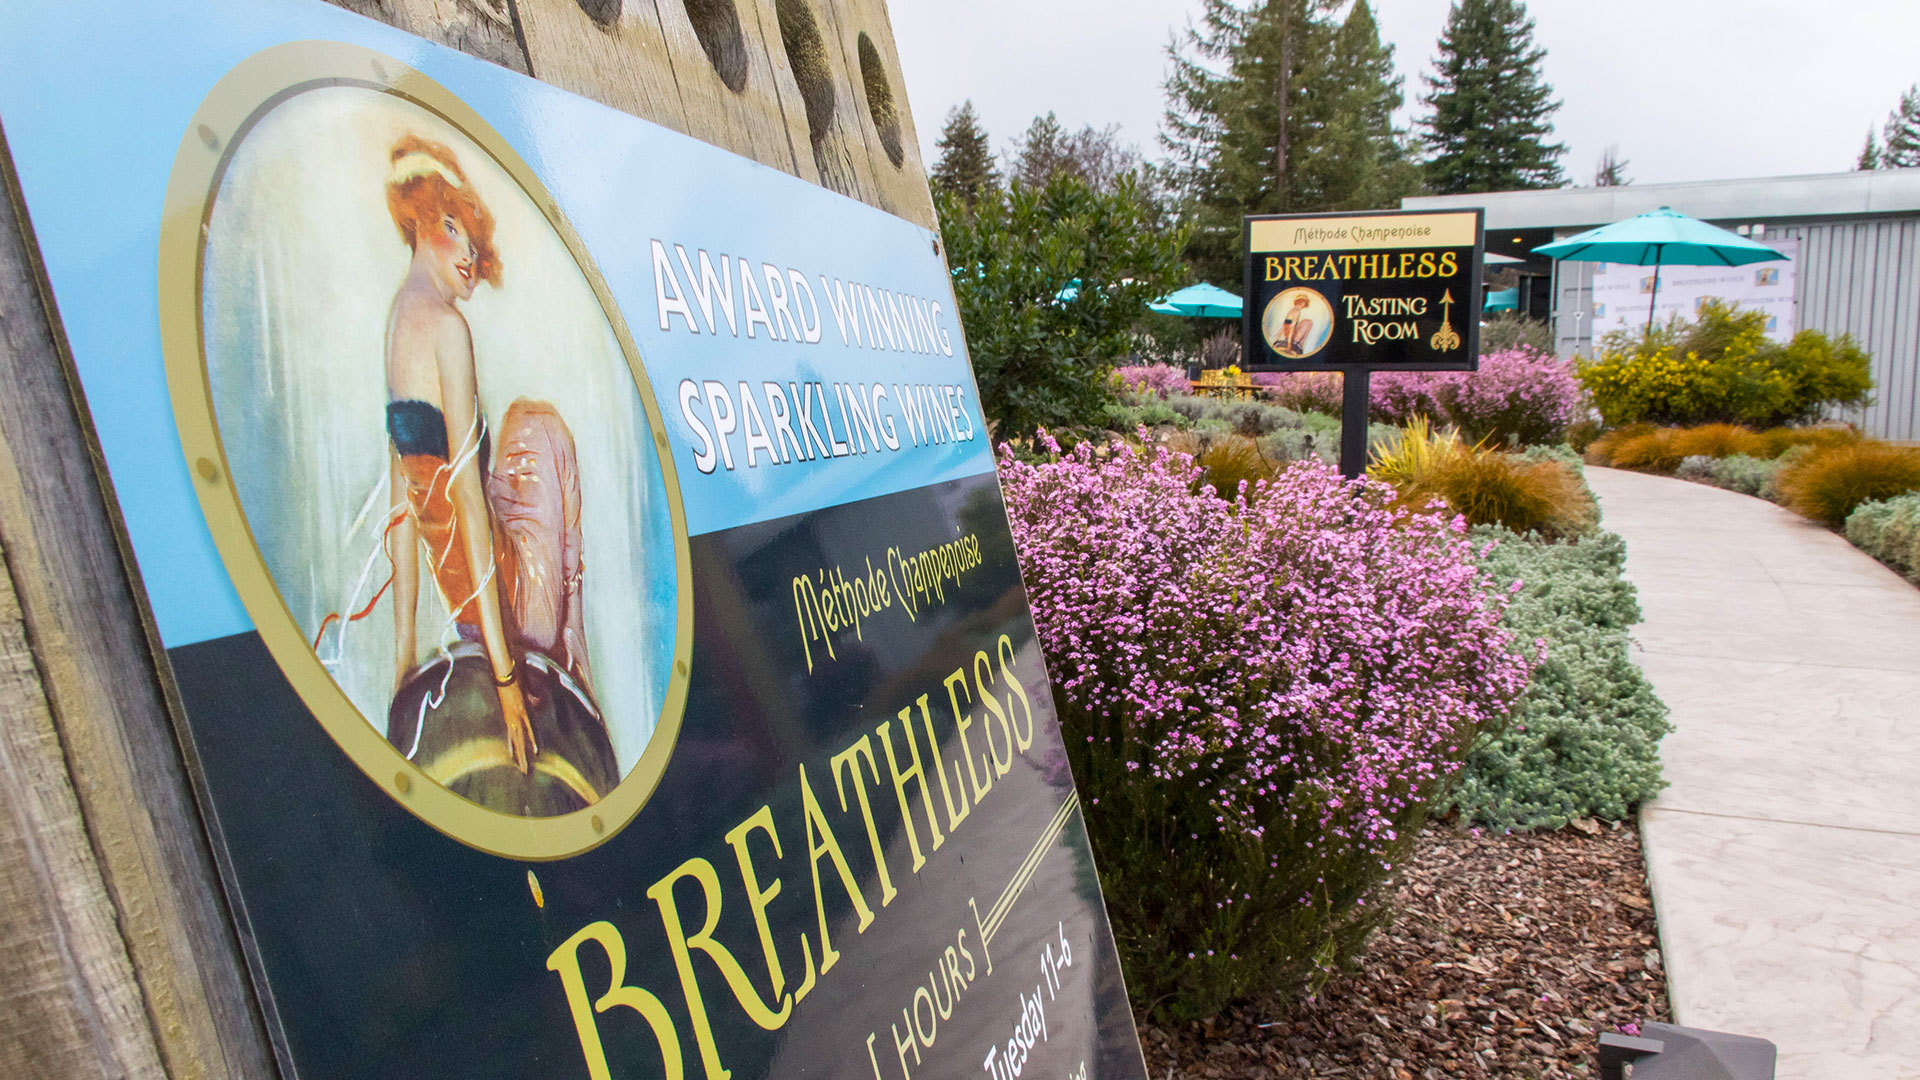 Closeup of Breathless Winery poster, 'Award Winning Sparkling Wine' and arrow pointing towards tasting room.